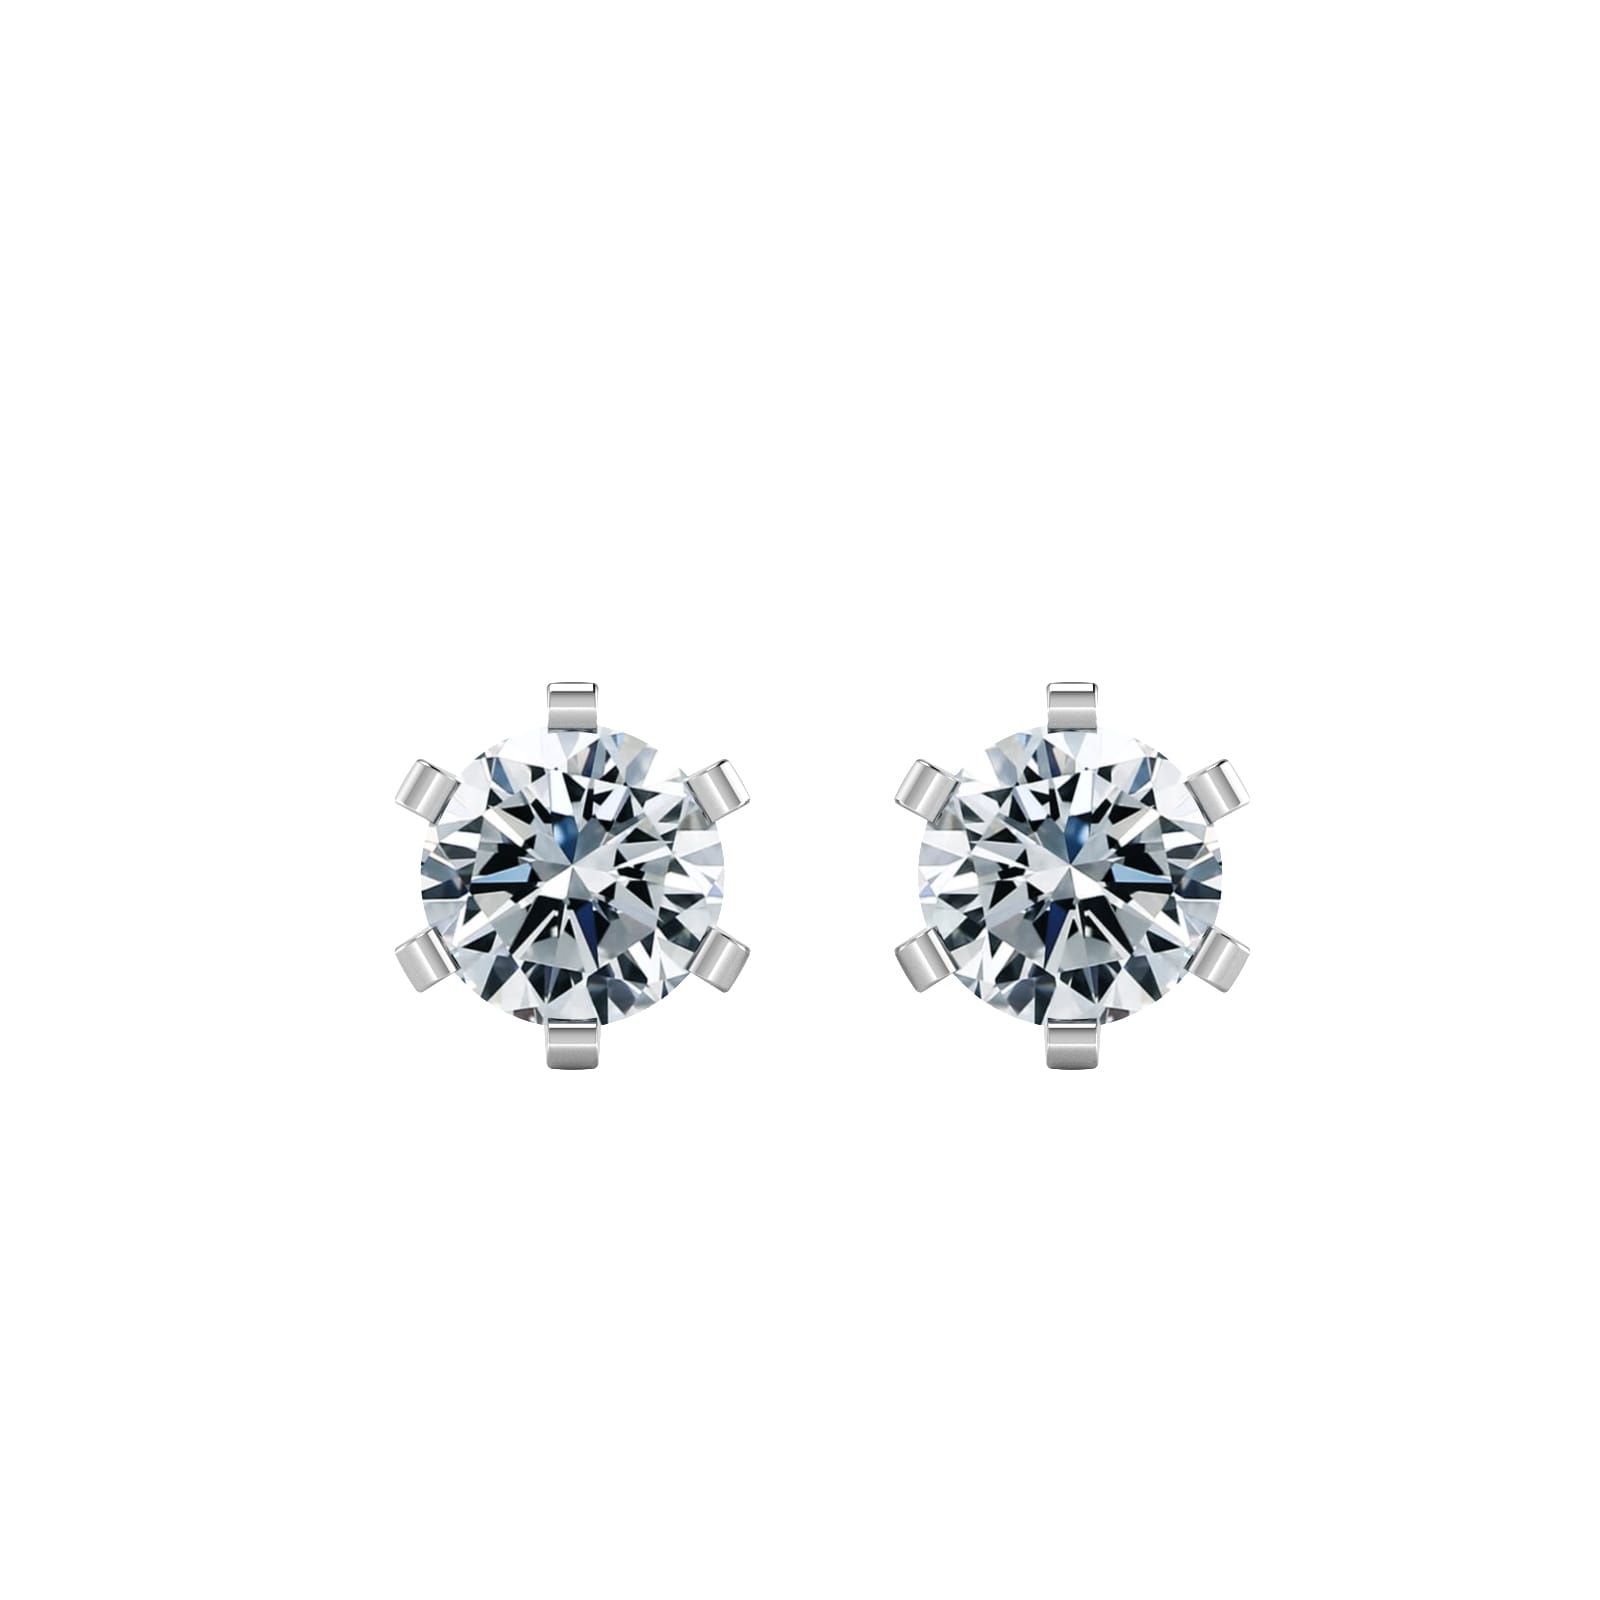 9ct White Gold 0.75cttw Solitaire Diamond Stud Earrings